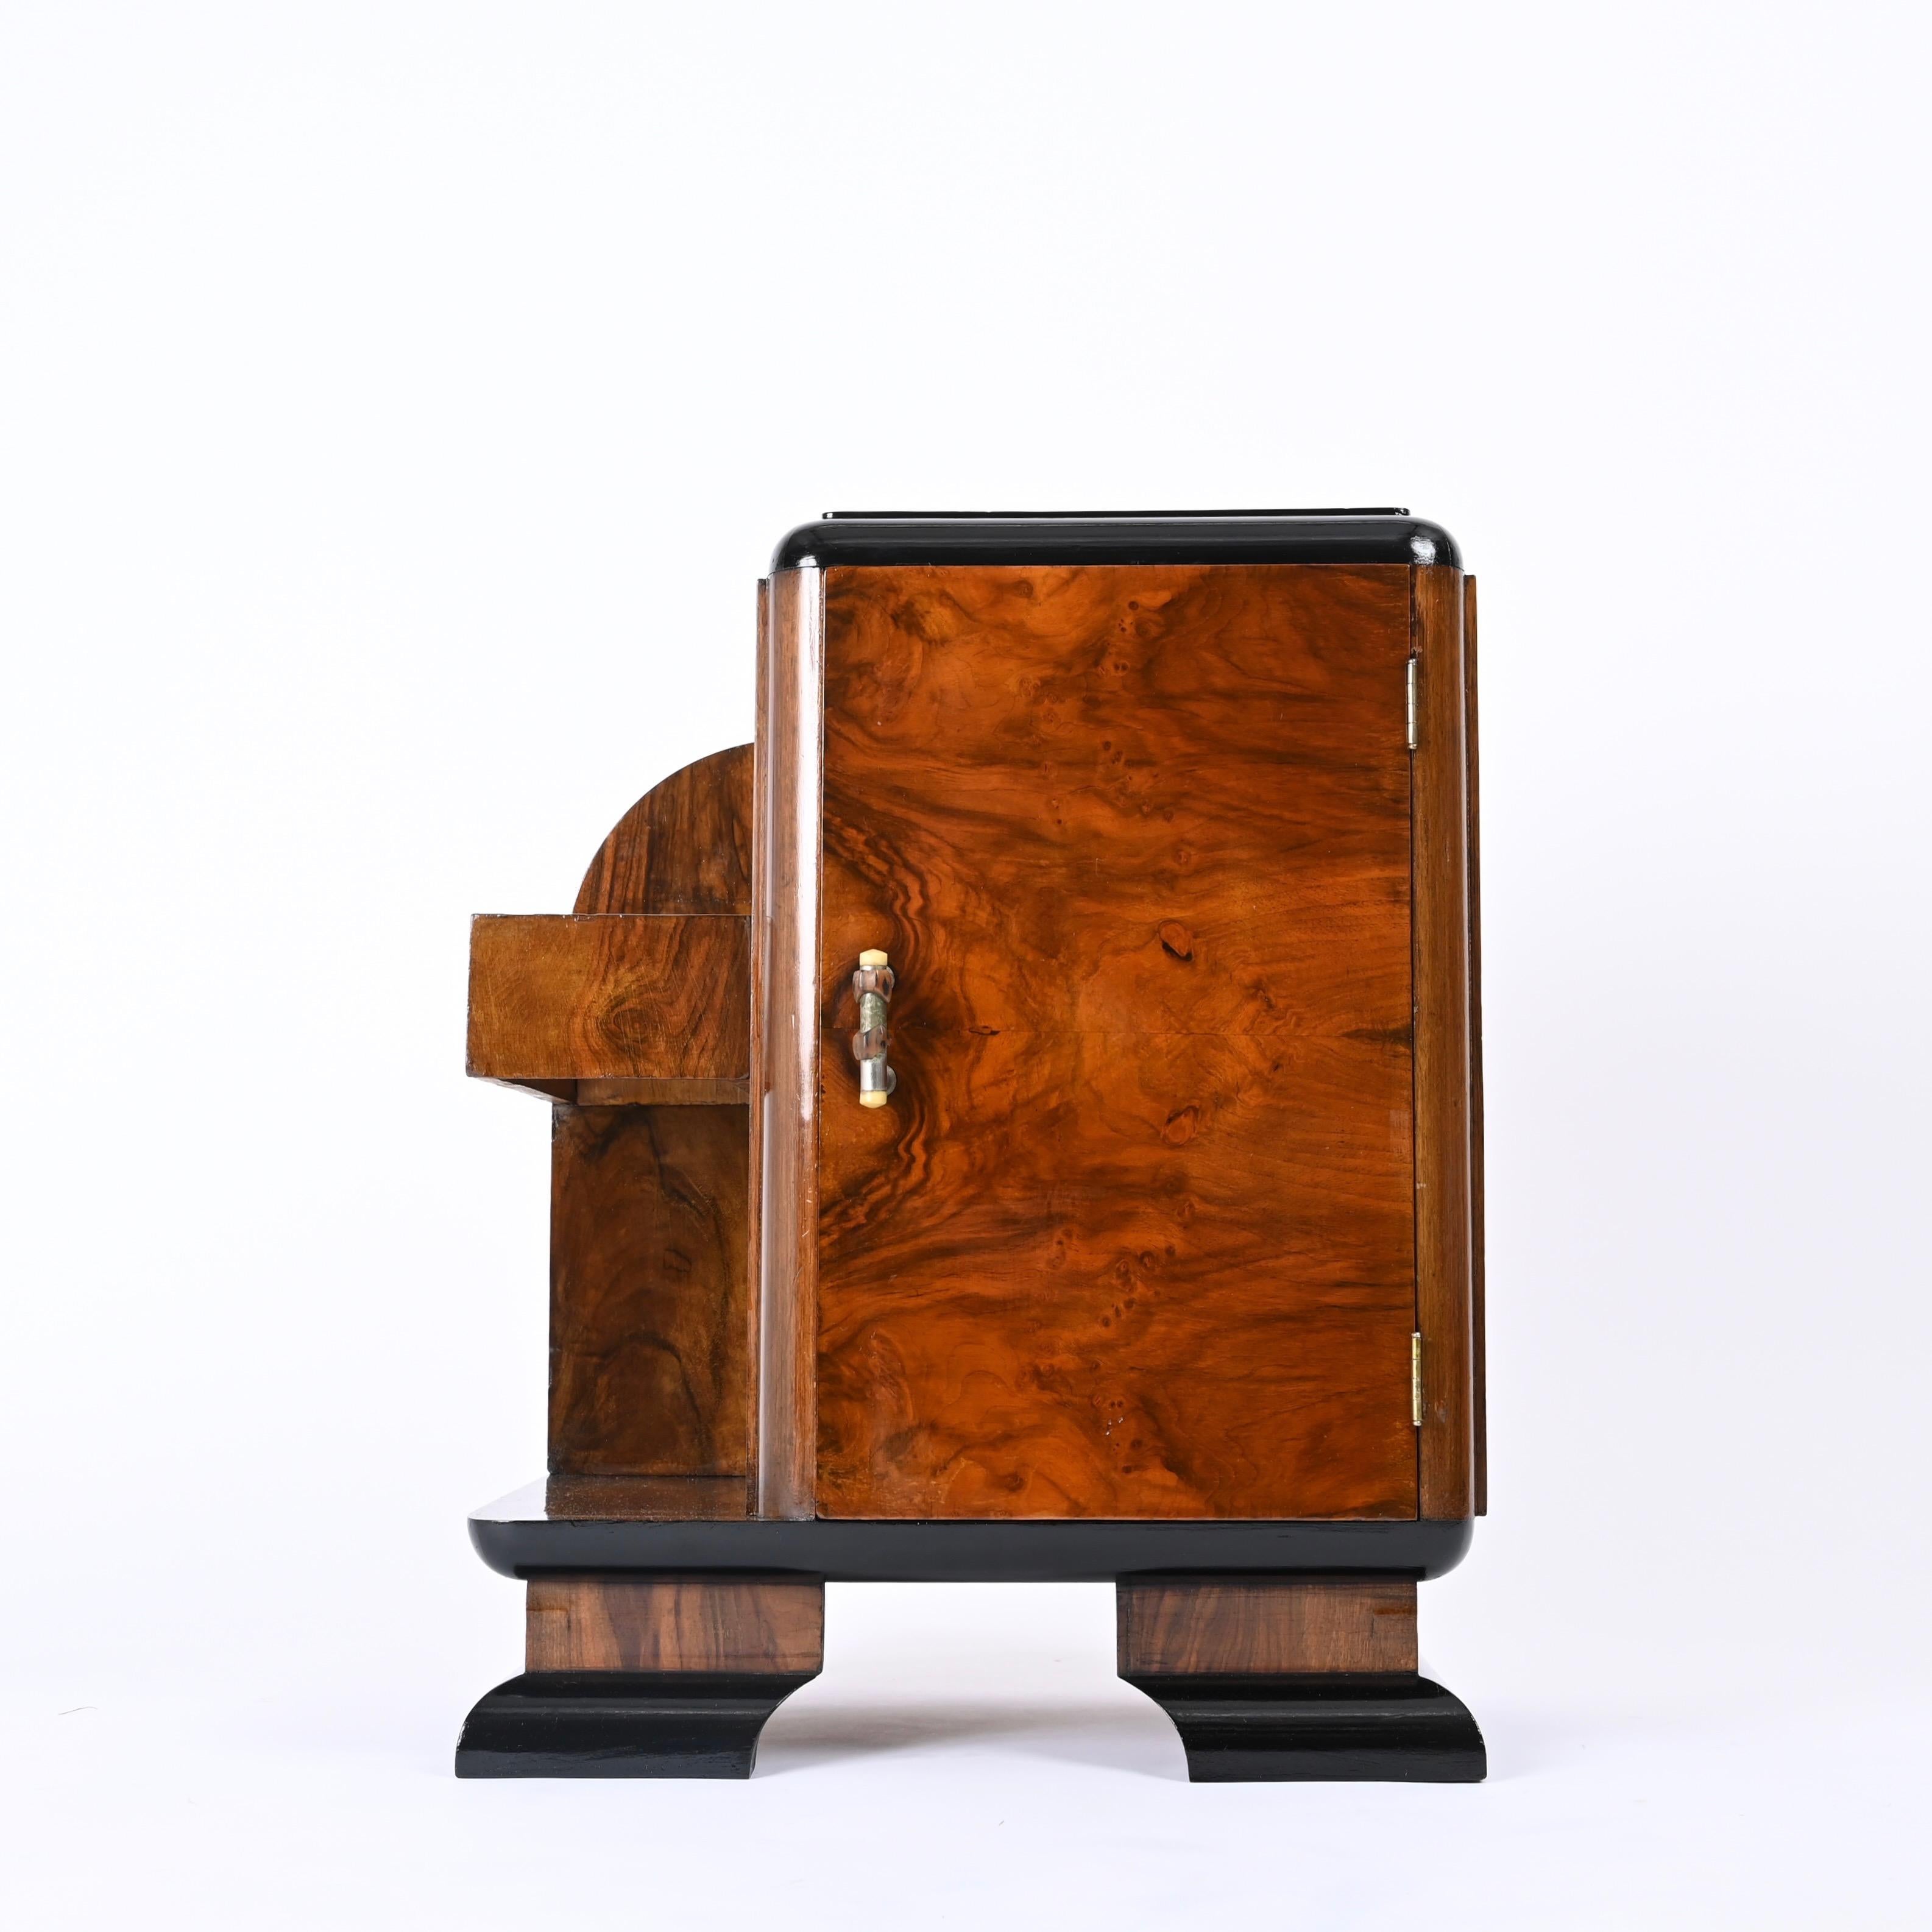 20th Century Art Deco Bedside Table, Olive Burl and Lacquered Wood, Italian Nightstand, 1930s